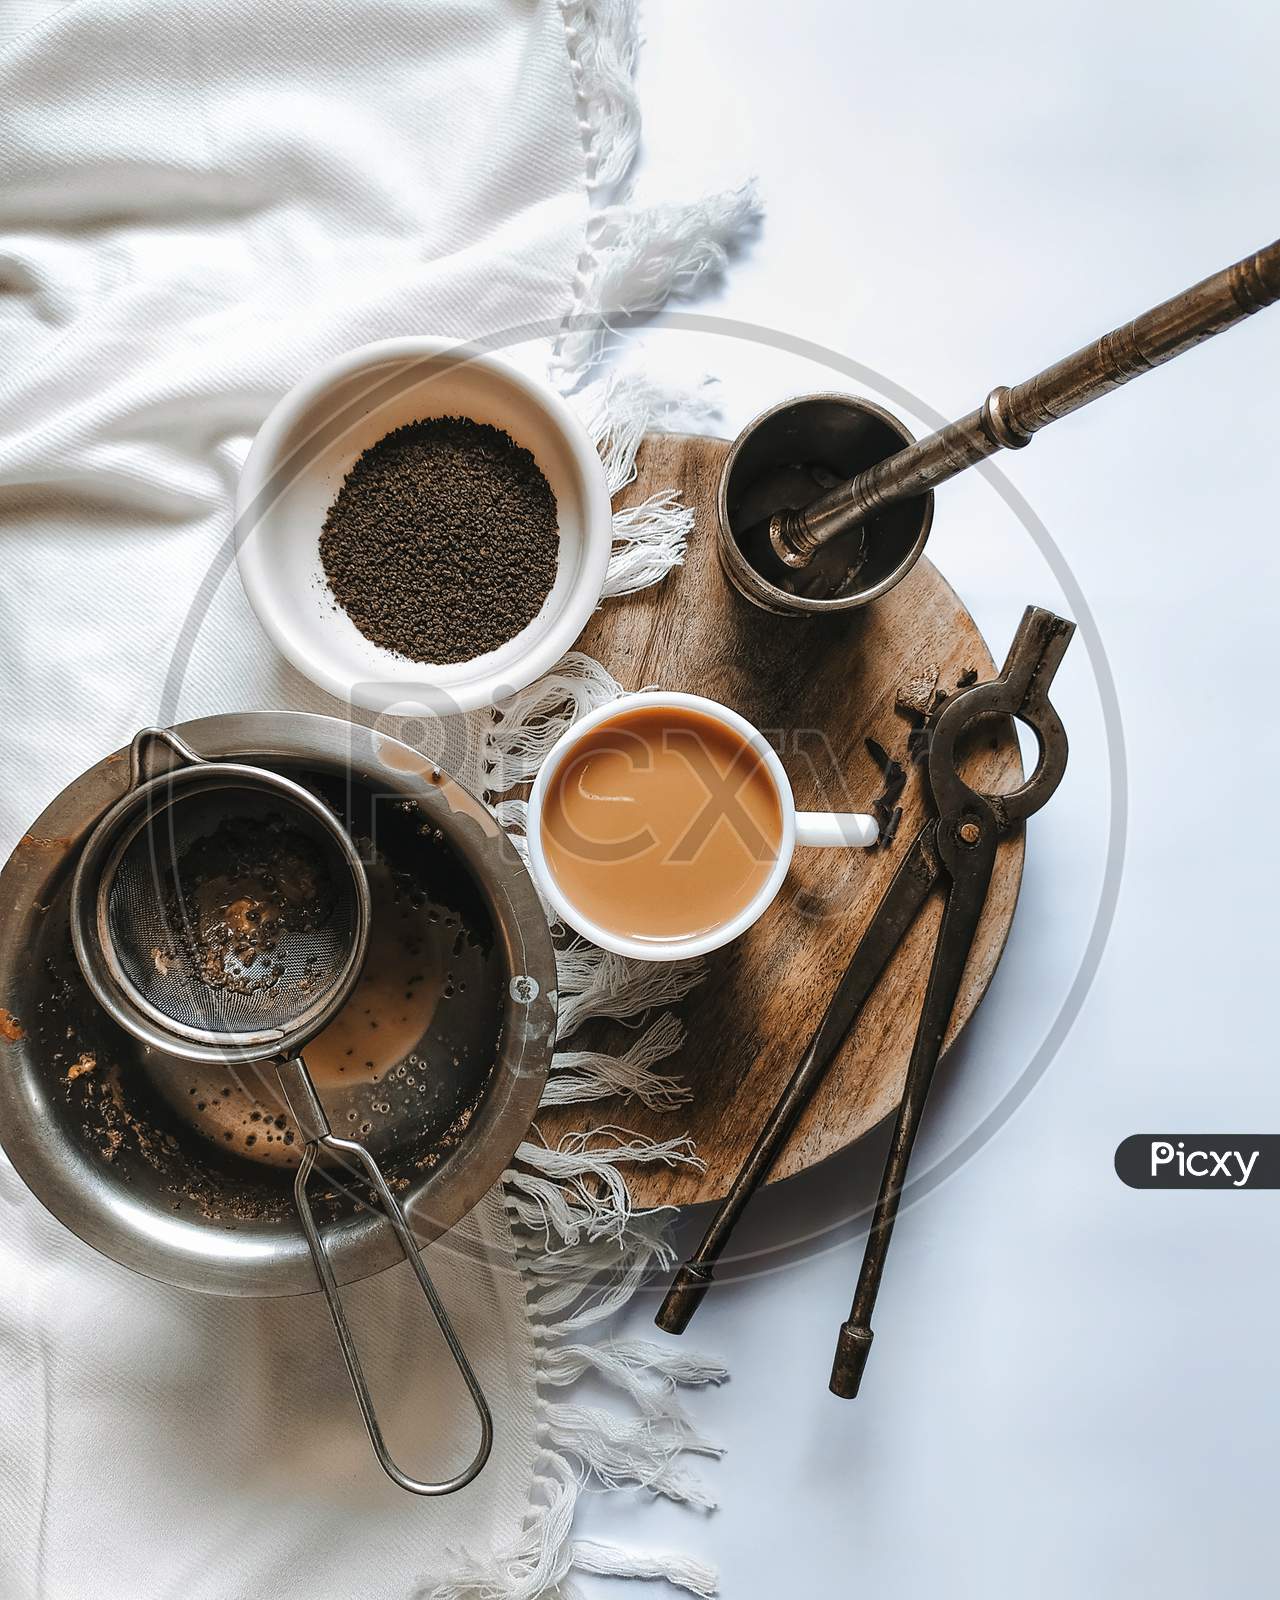 Indian masala chai with ingredients, Flatlay photography